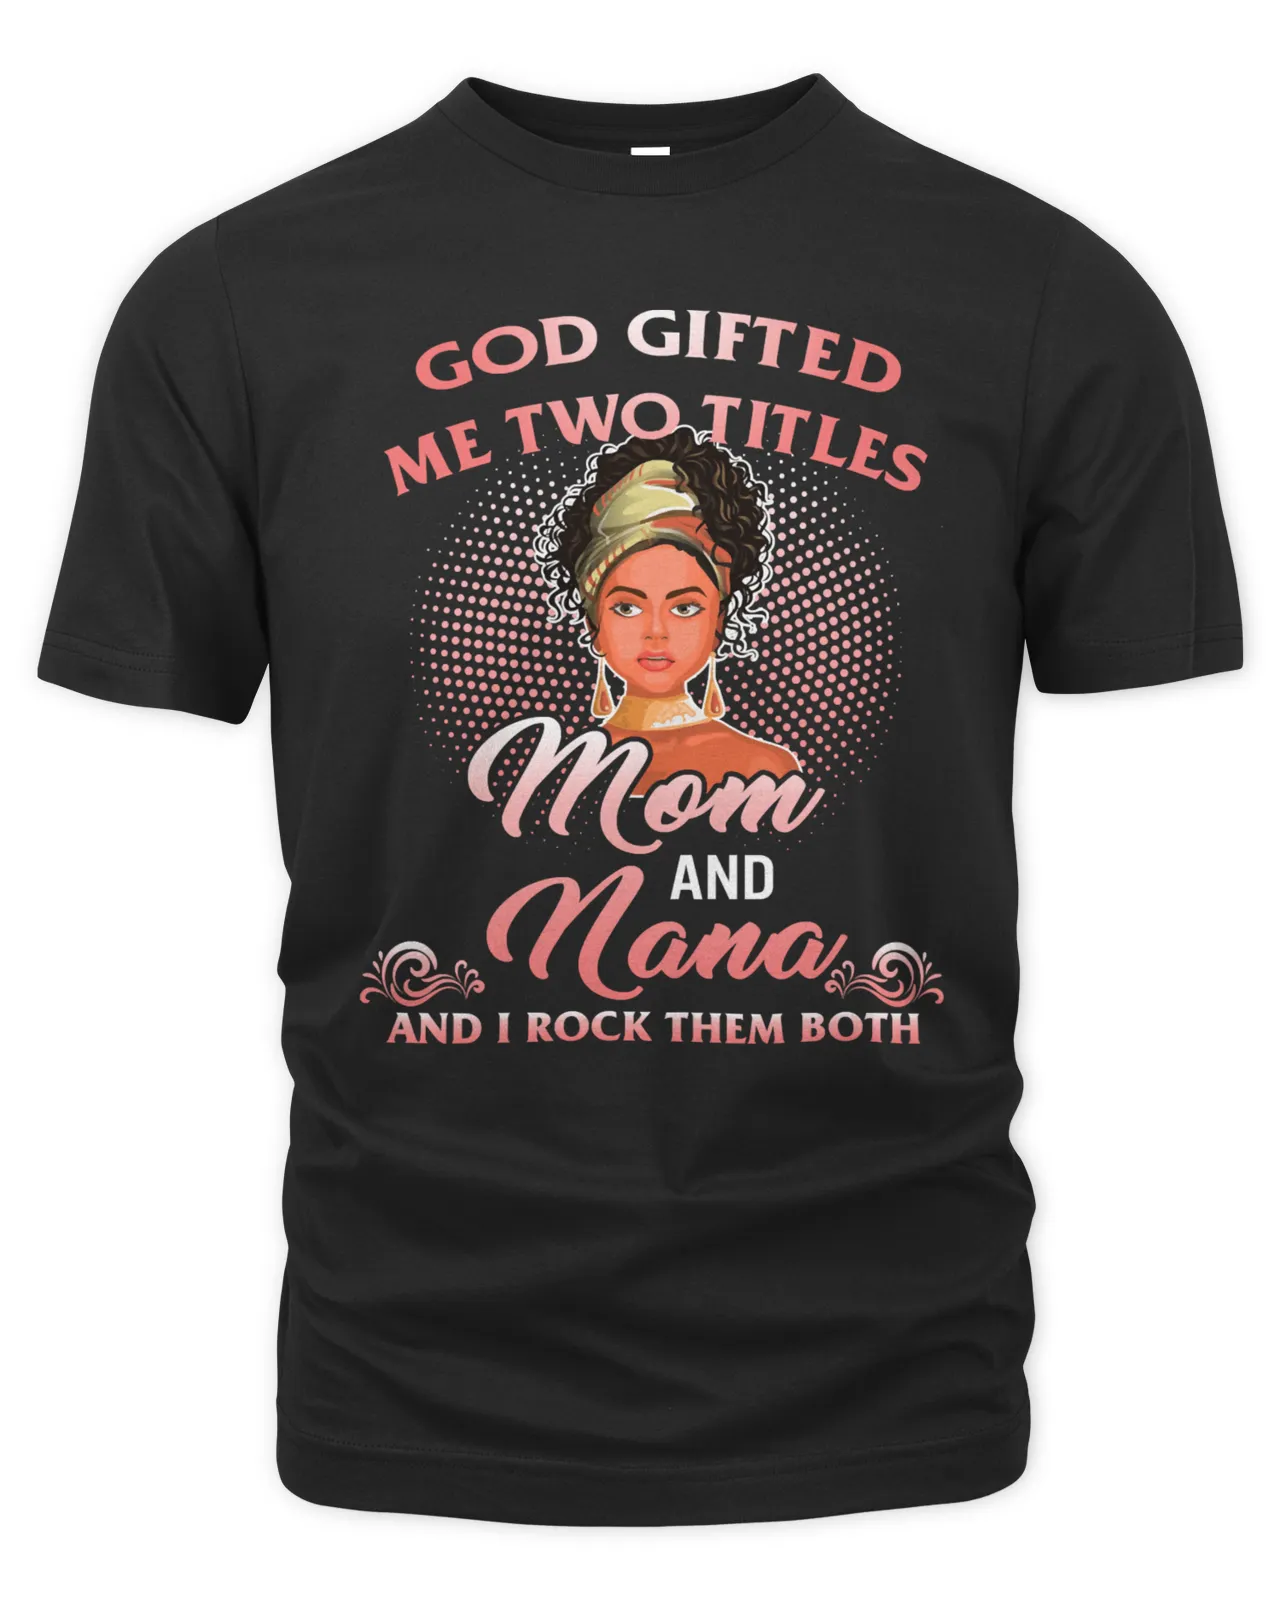 Gift For Mom Gift For Nana Mother's Day Gift God Gifted Me Two Titles Mom Nana Leopard Wink Woman Funny T-Shirt Grandma Gift 18225032